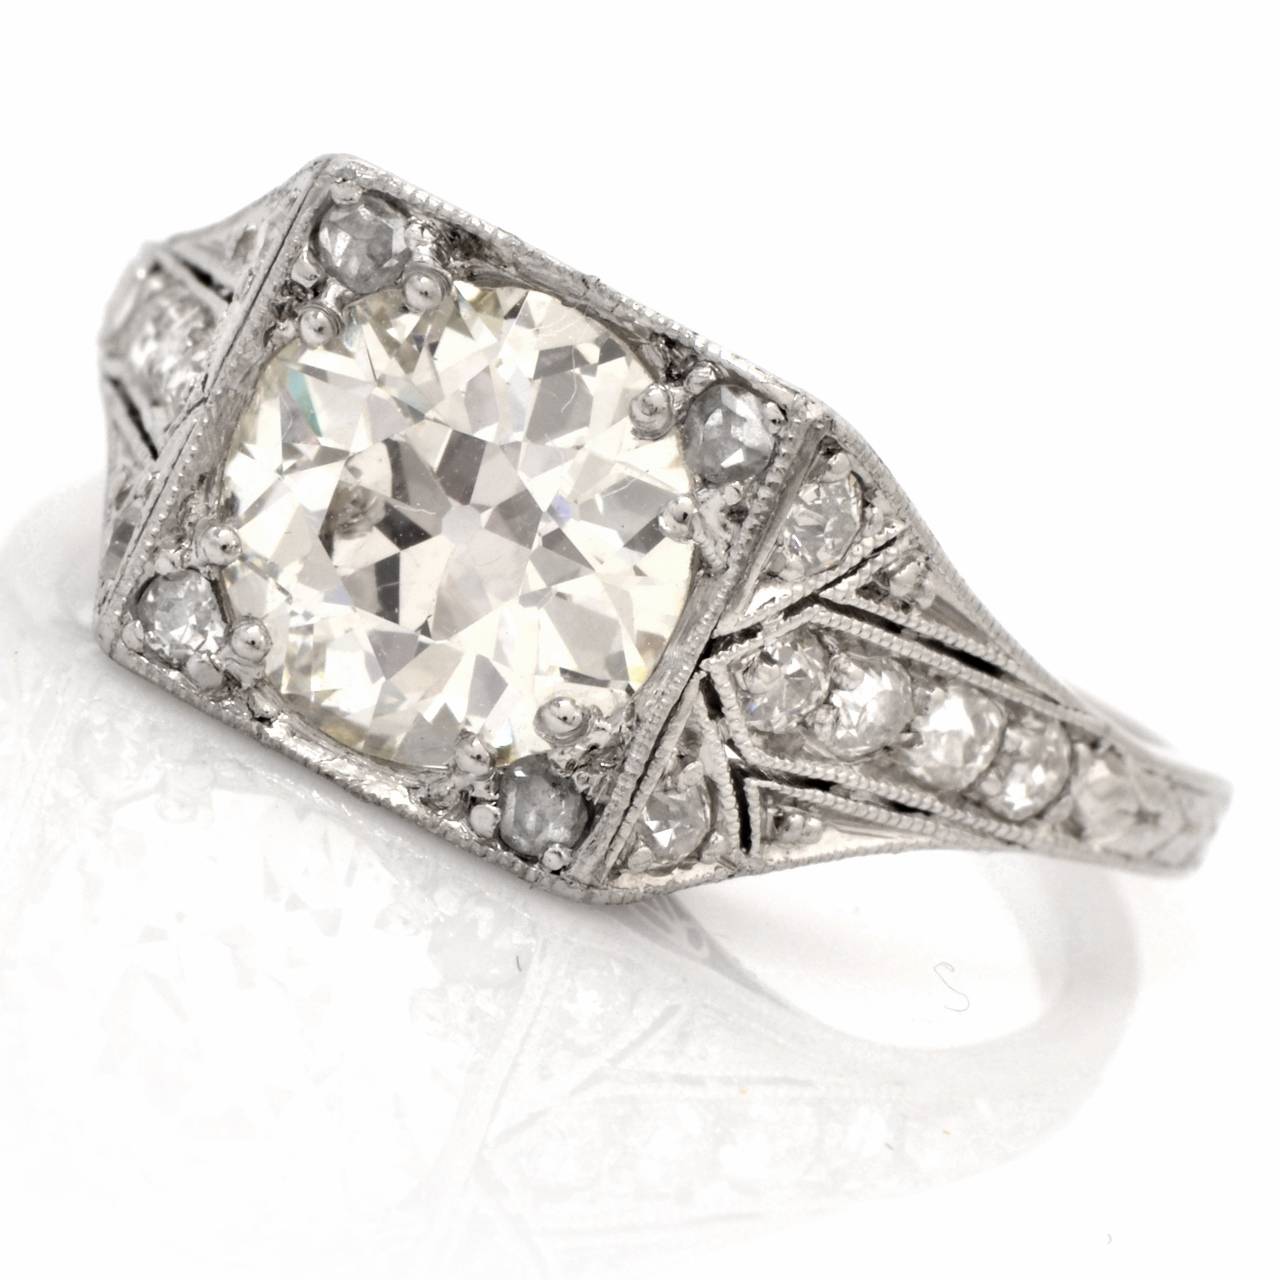 This stunning , authentic Art Deco engagement ring with diamonds is crafted in solid platinum, weighing 3.4 grams. Incorporating  quintessentially Art Deco features, this alluring engagement ring is designed with a quadrangular plaque, exposing an